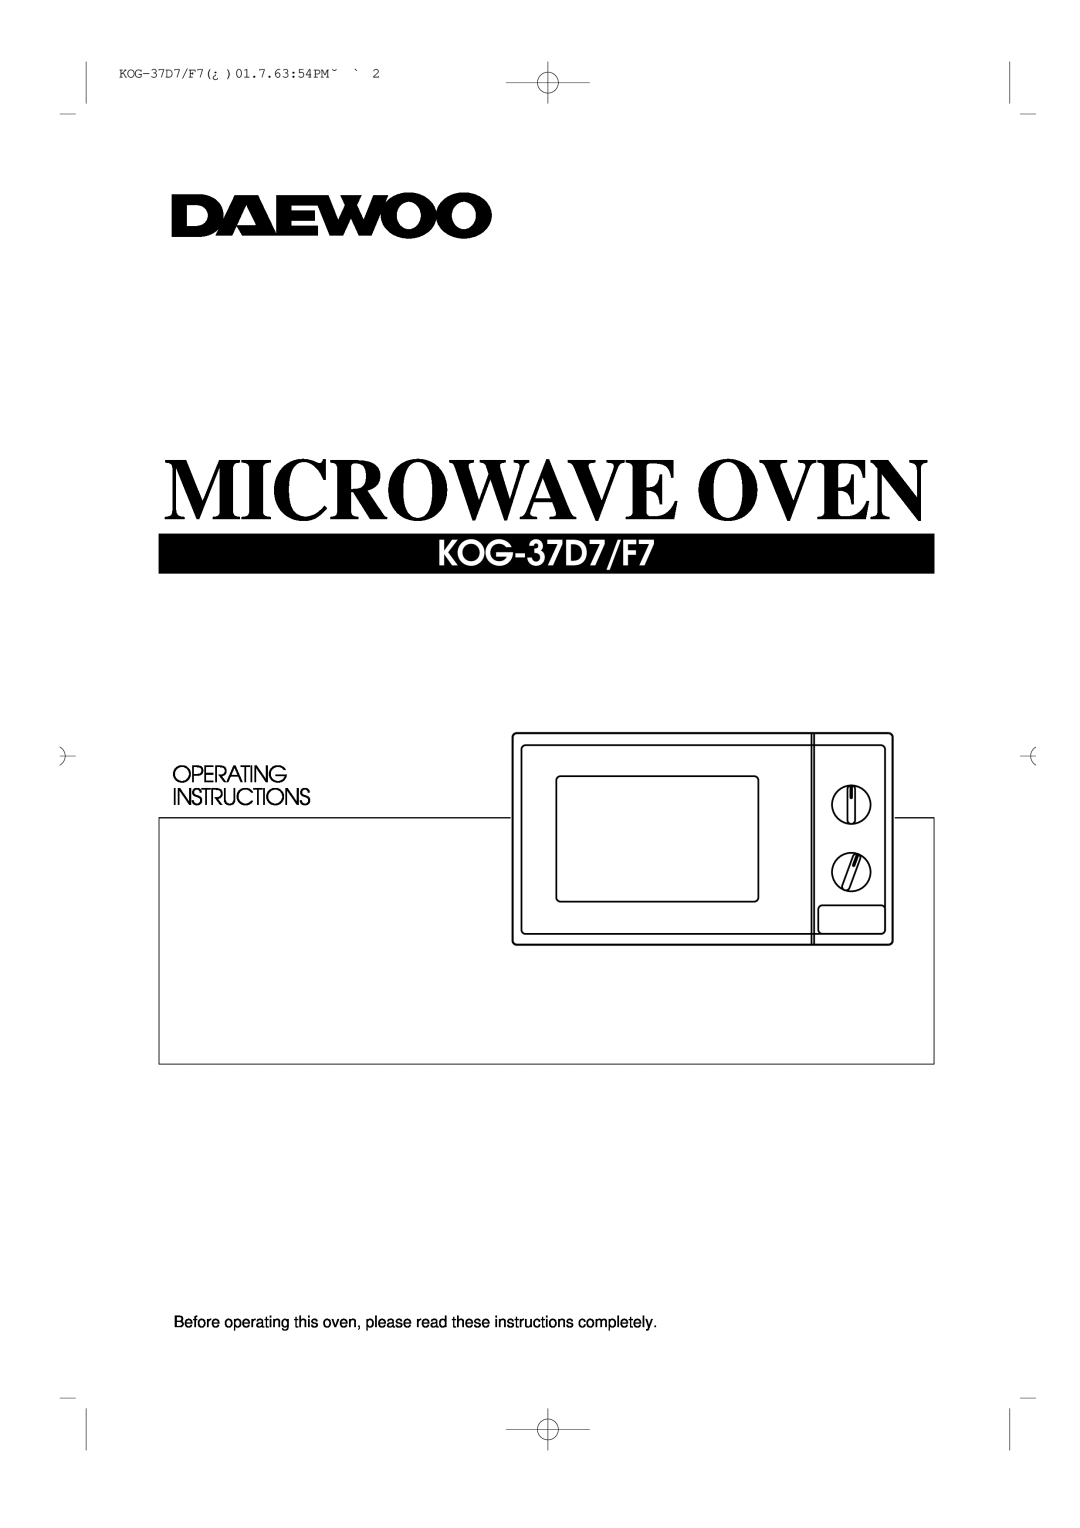 Daewoo manual Microwave Oven, Operating, Instructions, KOG-37D7/F7¿ 01.7.6354PM˘ ` 